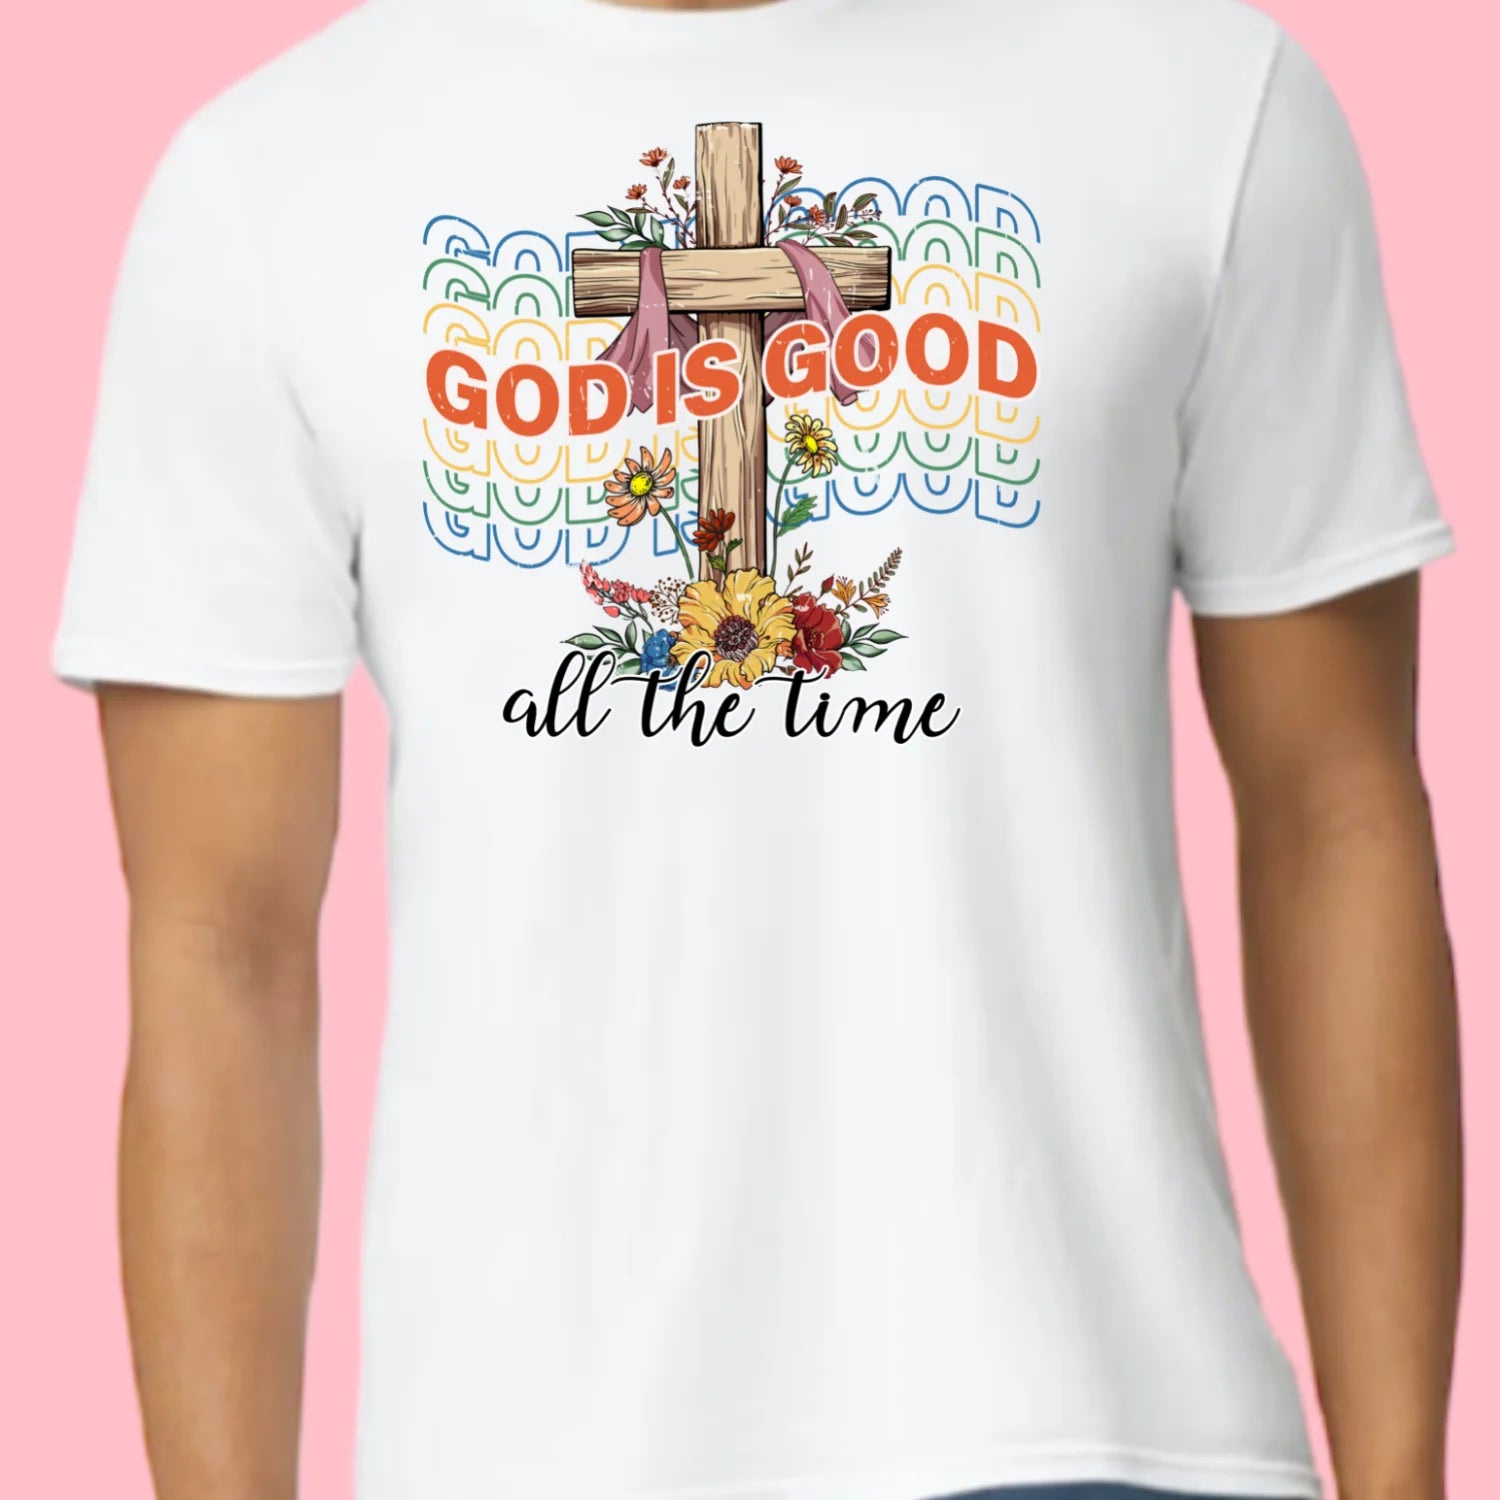 Skitongift God Is Good All The Time, Christian Retro Funny Shirt, gifts for Dad Mom,Gifts for Him, Her, Gifts for Dad Mom